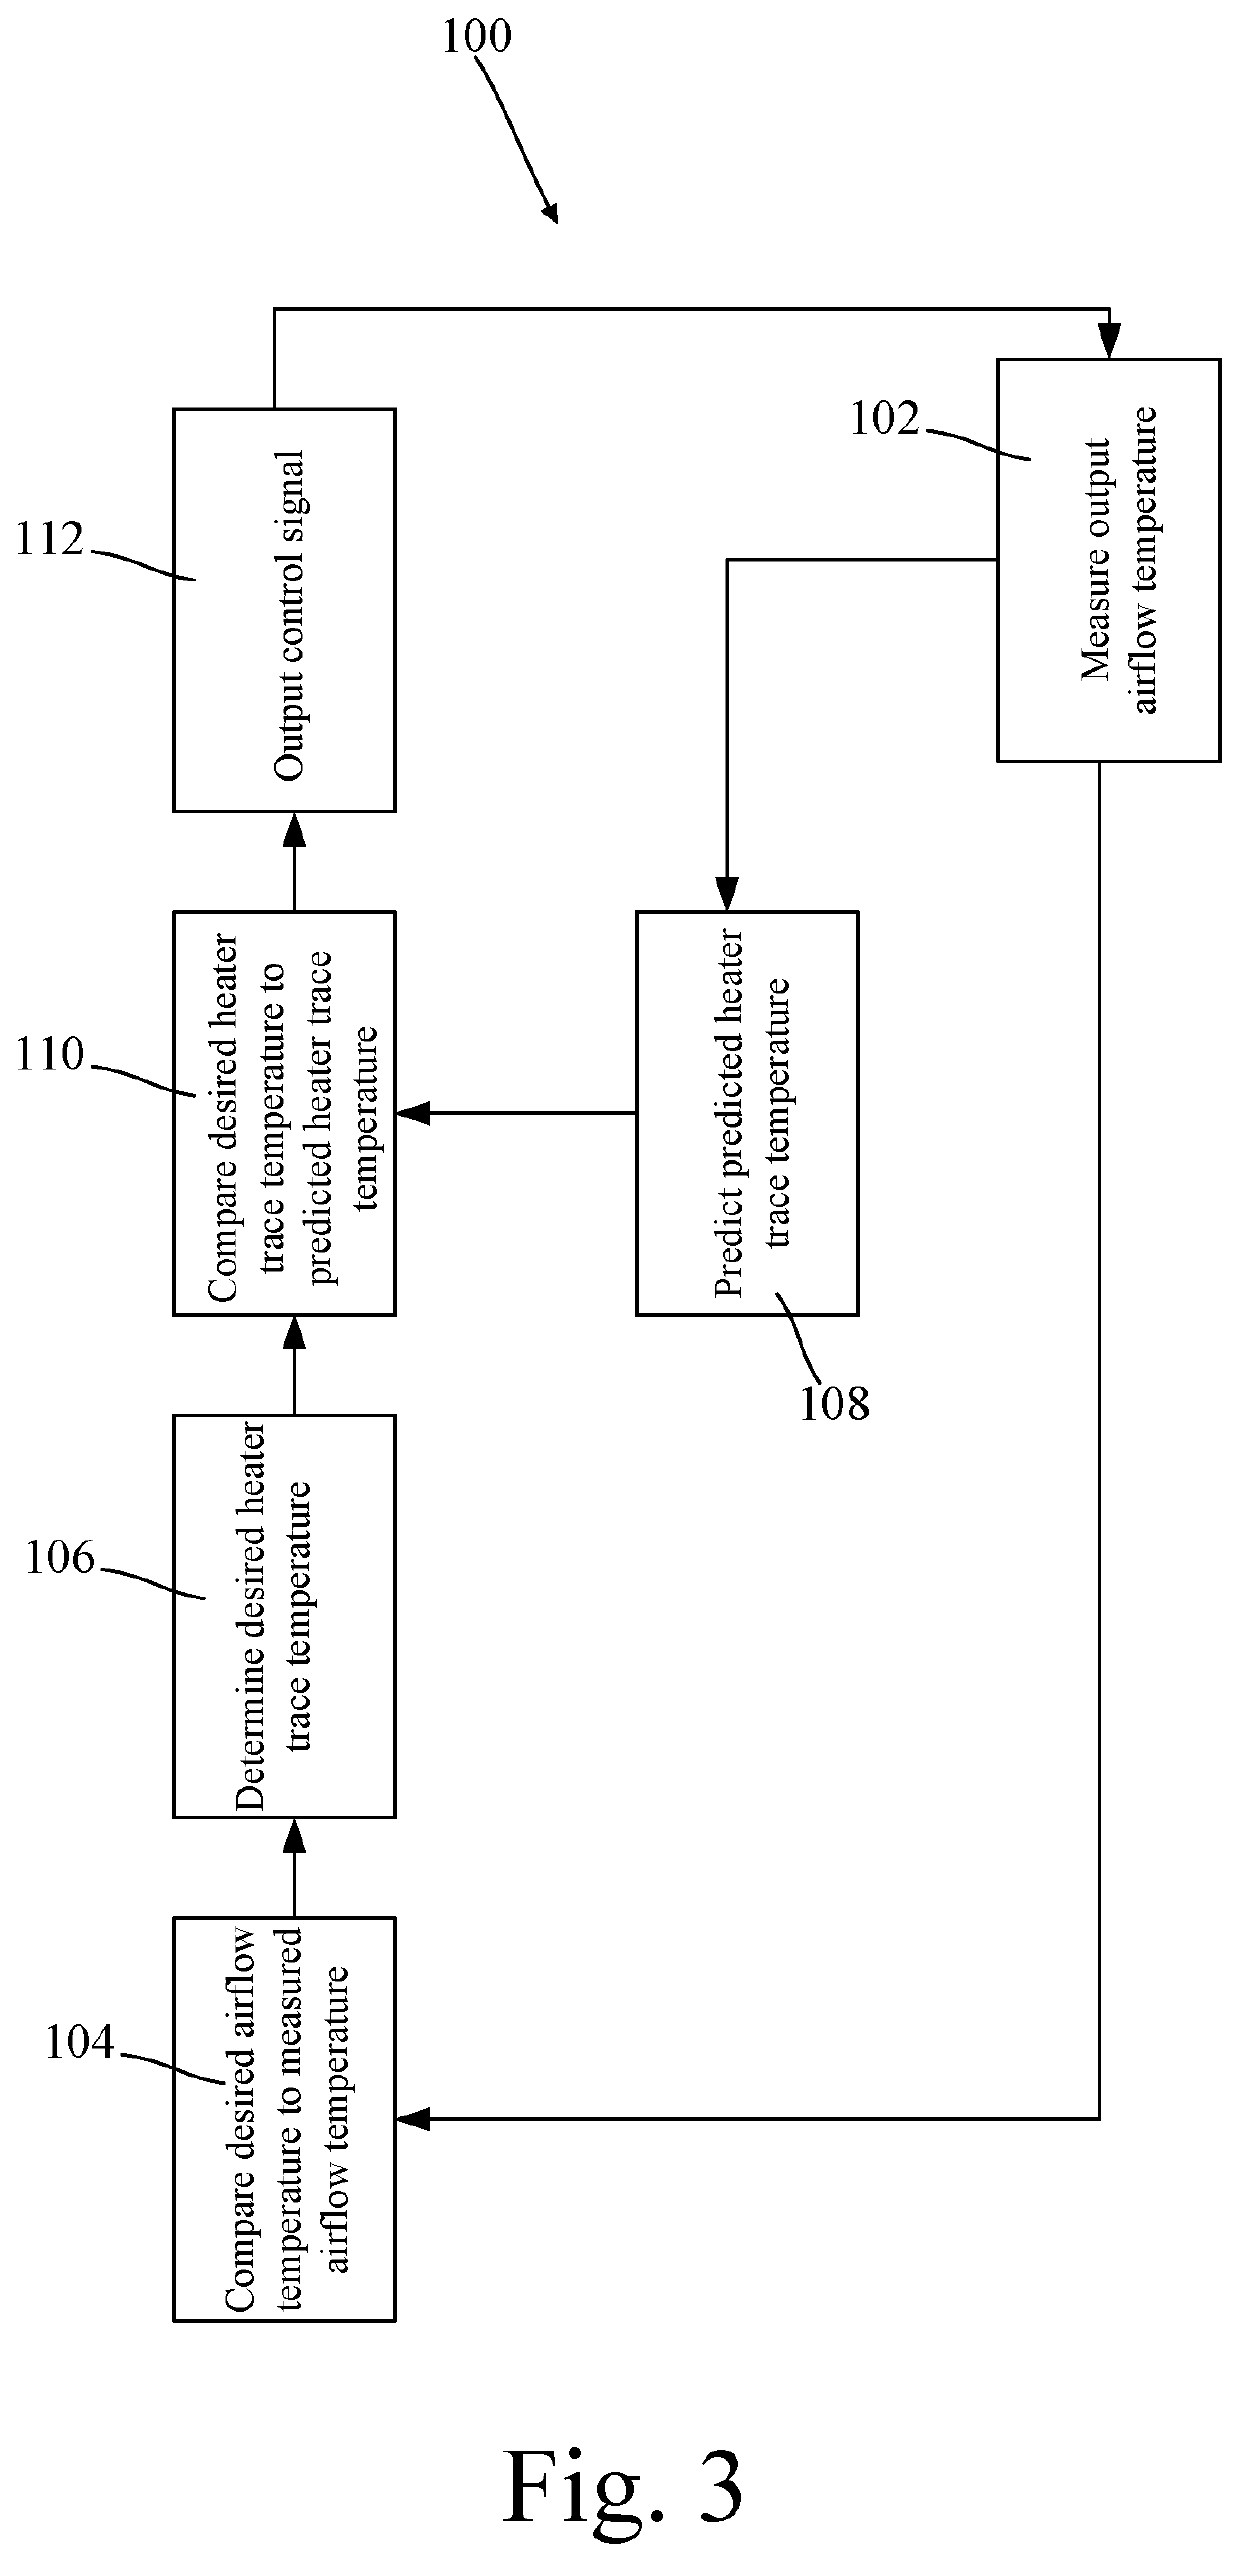 Method of controlling a haircare appliance